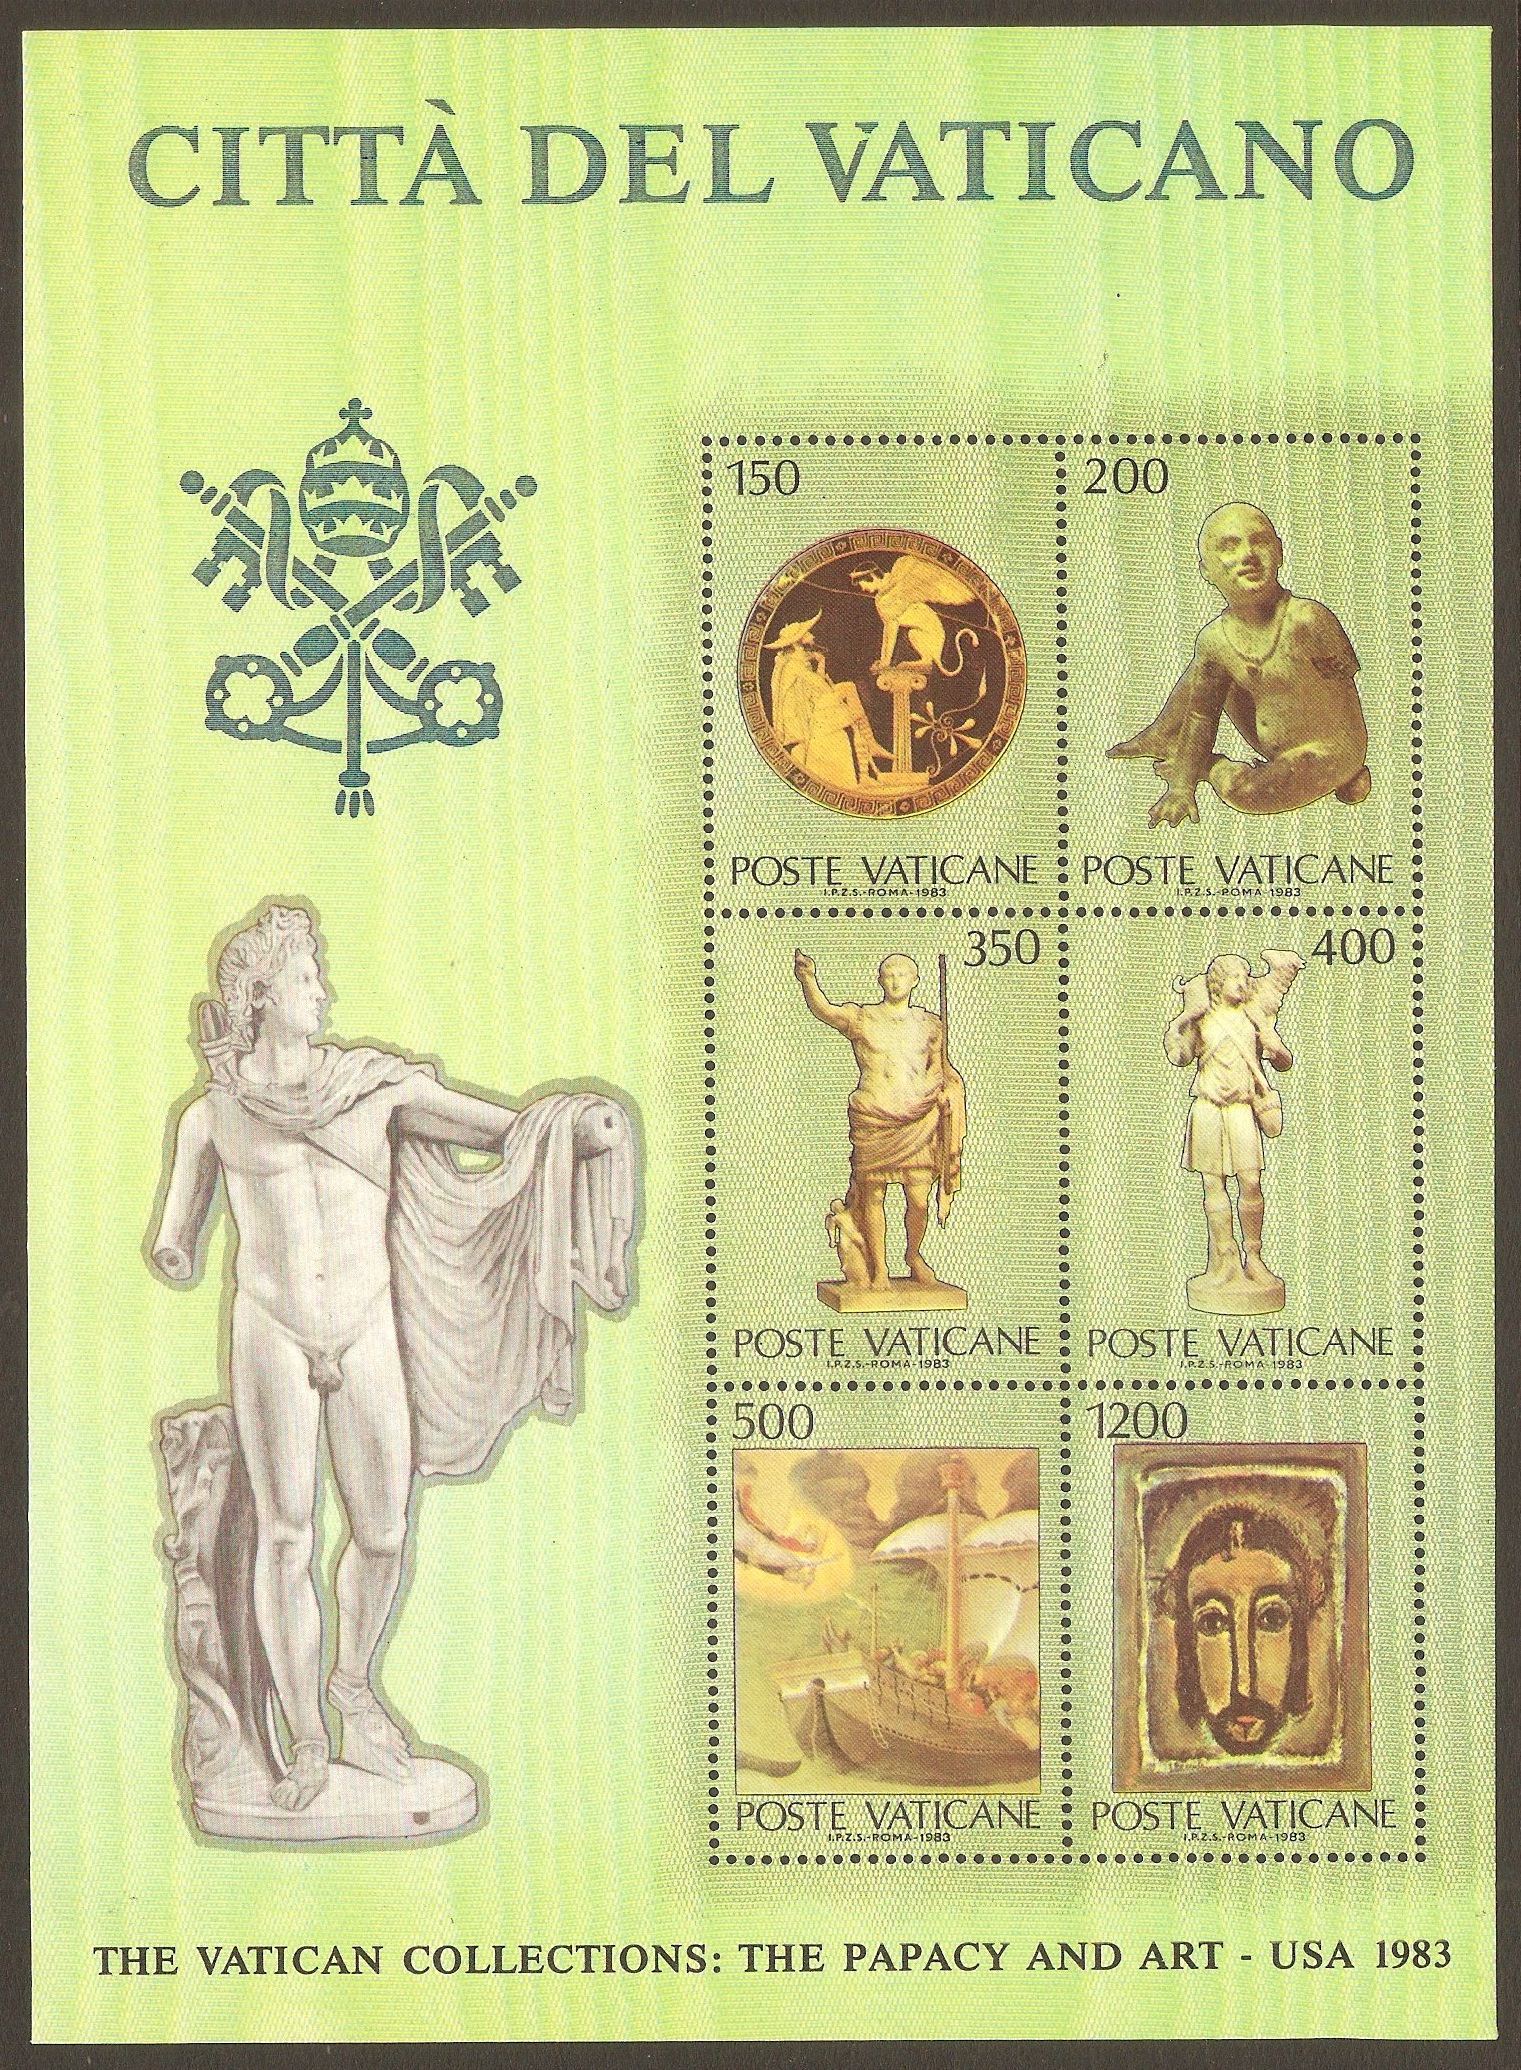 Vatican City 1983 Vatican Collections sheet (3rd. Iss). SGMS803.